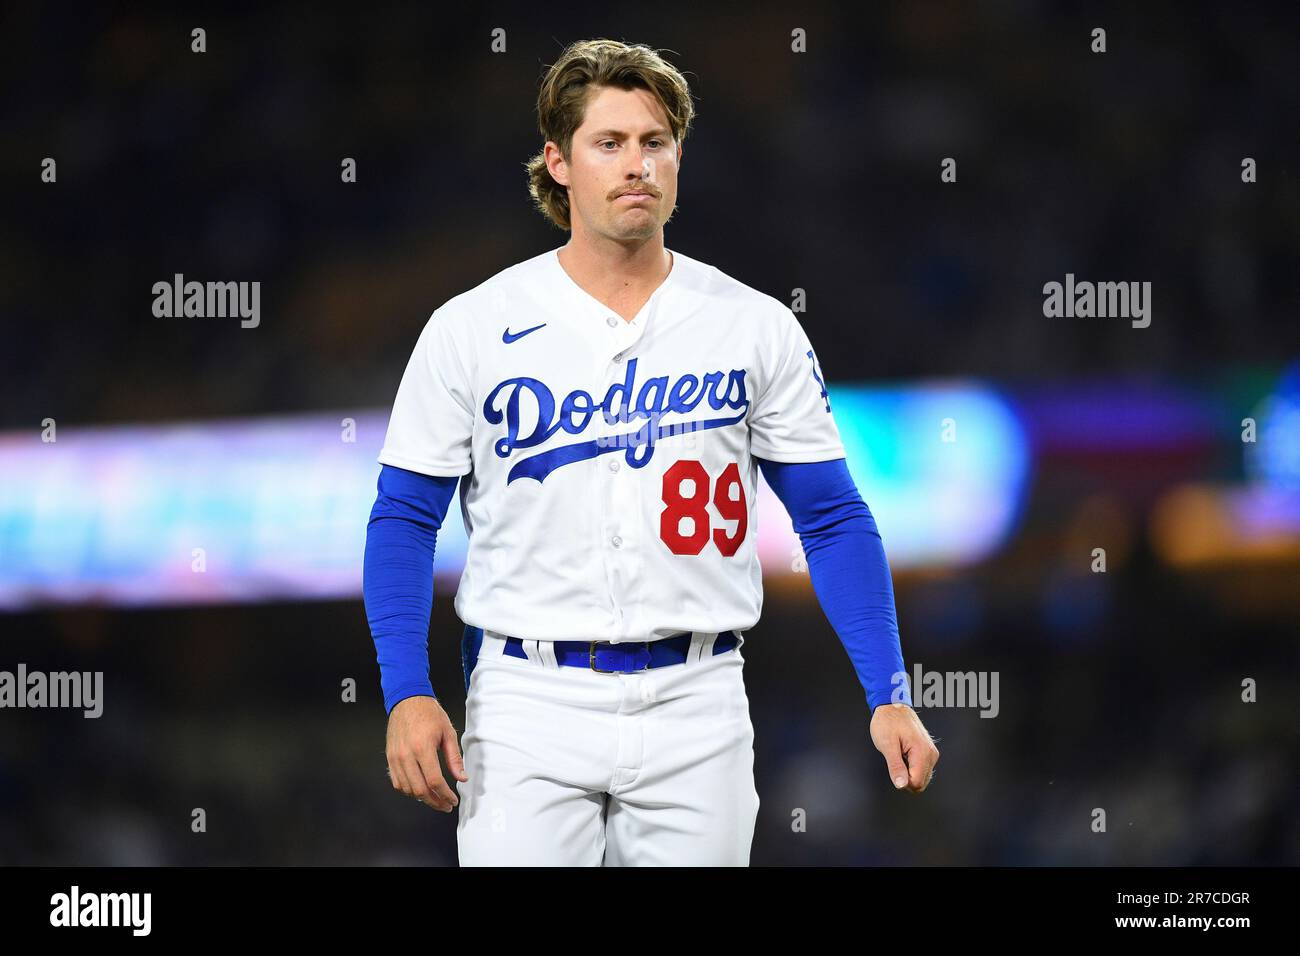 LOS ANGELES, CA - JUNE 13: Los Angeles Dodgers outfielder Jonny DeLuca (89)  looks on during the MLB game between the Chicago White Sox and the Los  Angeles Dodgers on June 13